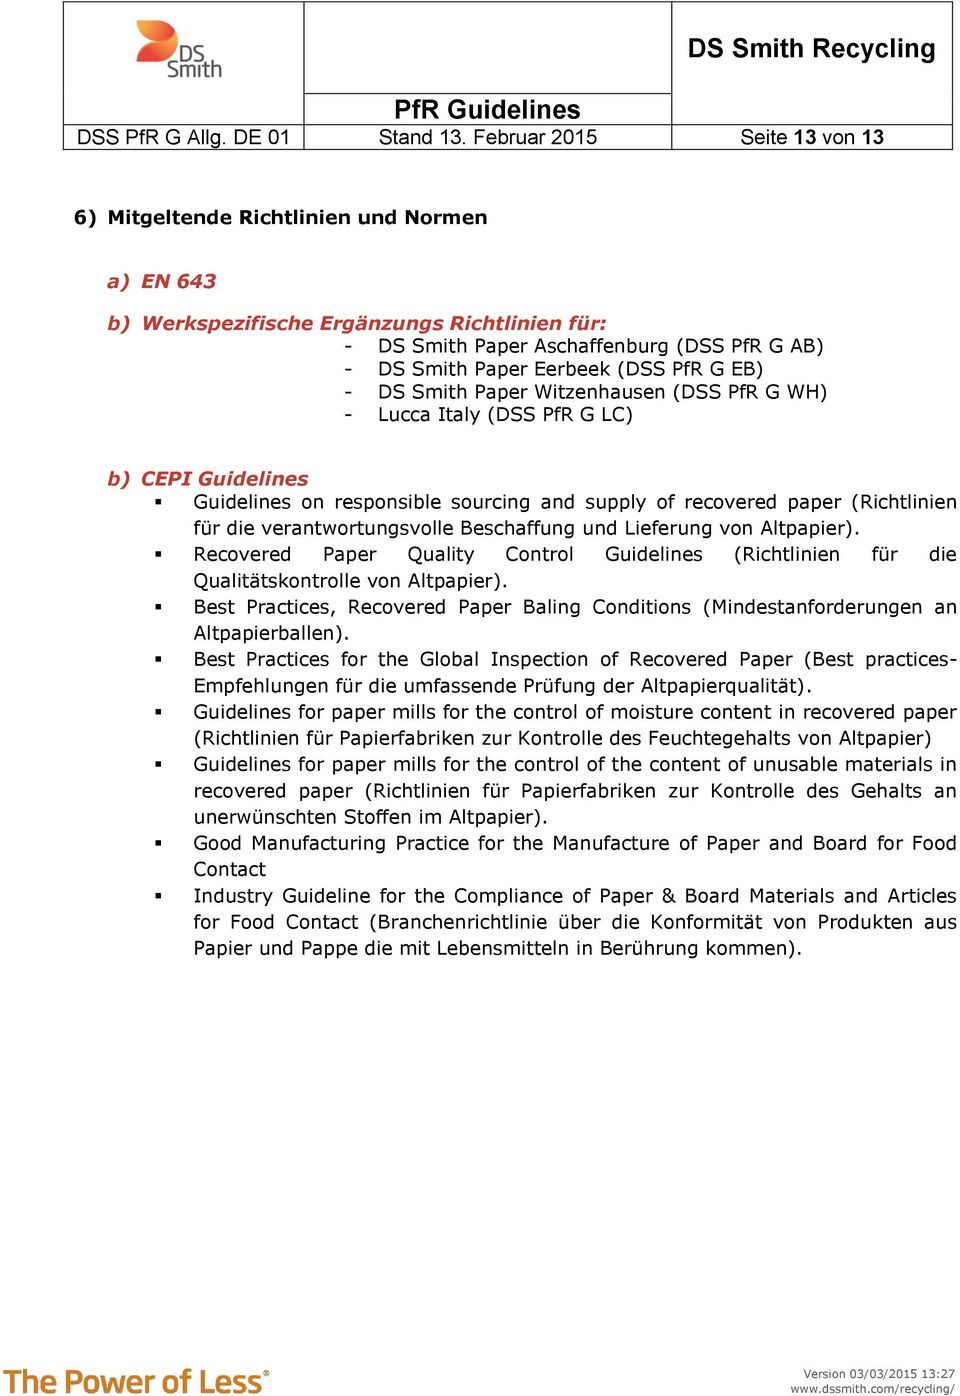 PfR G EB) - DS Smith Paper Witzenhausen (DSS PfR G WH) - Lucca Italy (DSS PfR G LC) b) CEPI Guidelines Guidelines on responsible sourcing and supply of recovered paper (Richtlinien für die